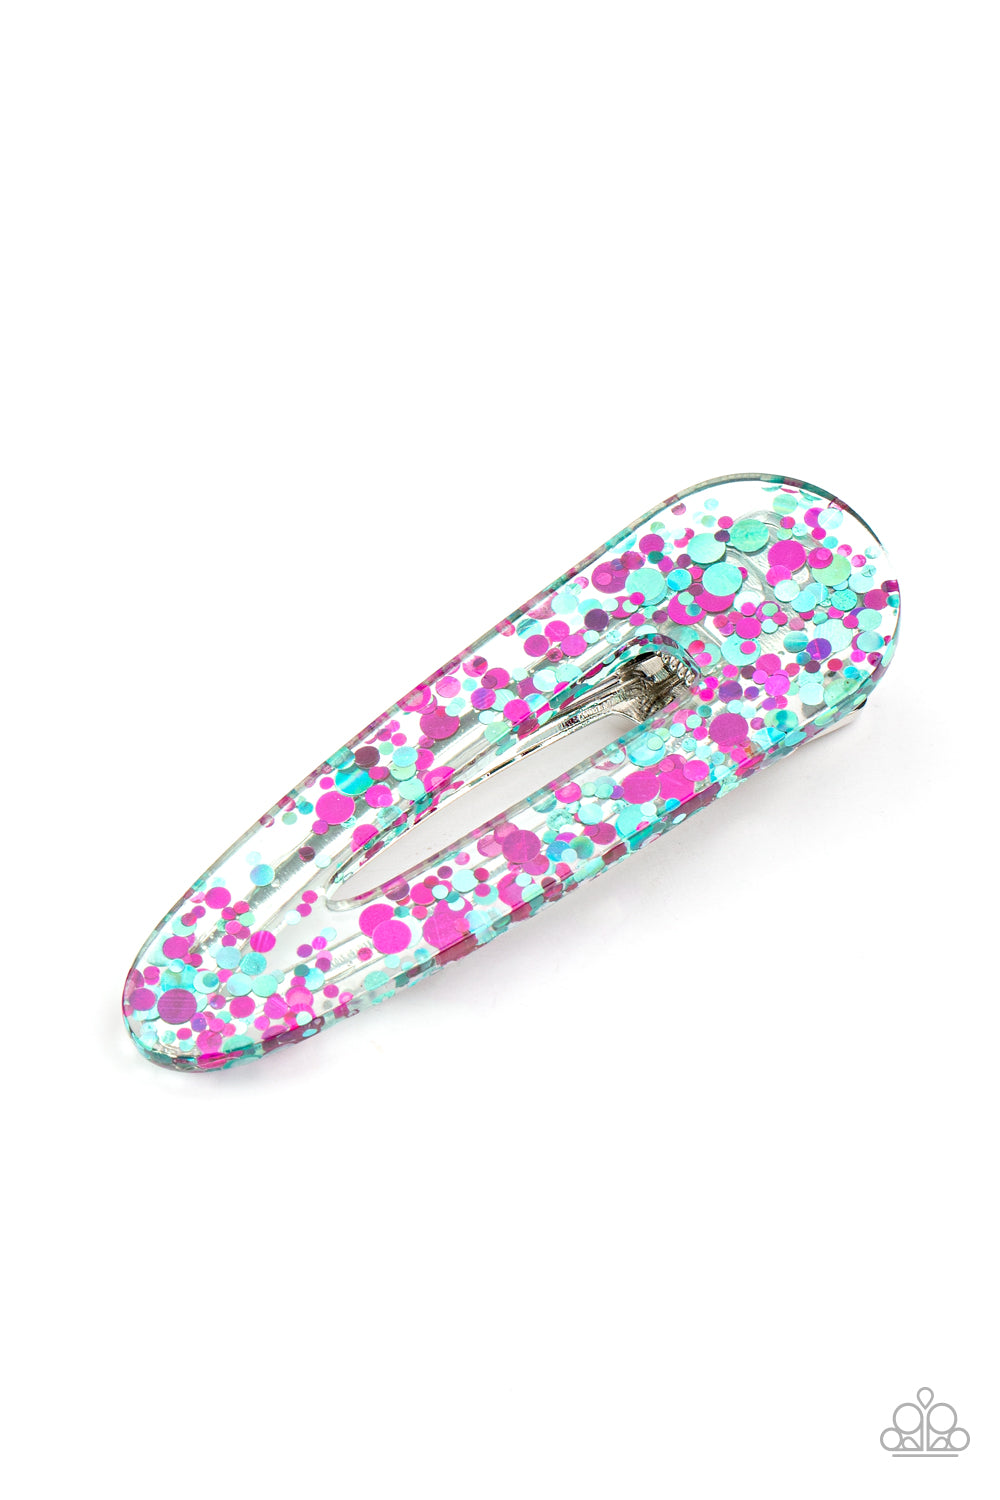 Wish Upon a Sequin Hair Clip (Pink, Multi)